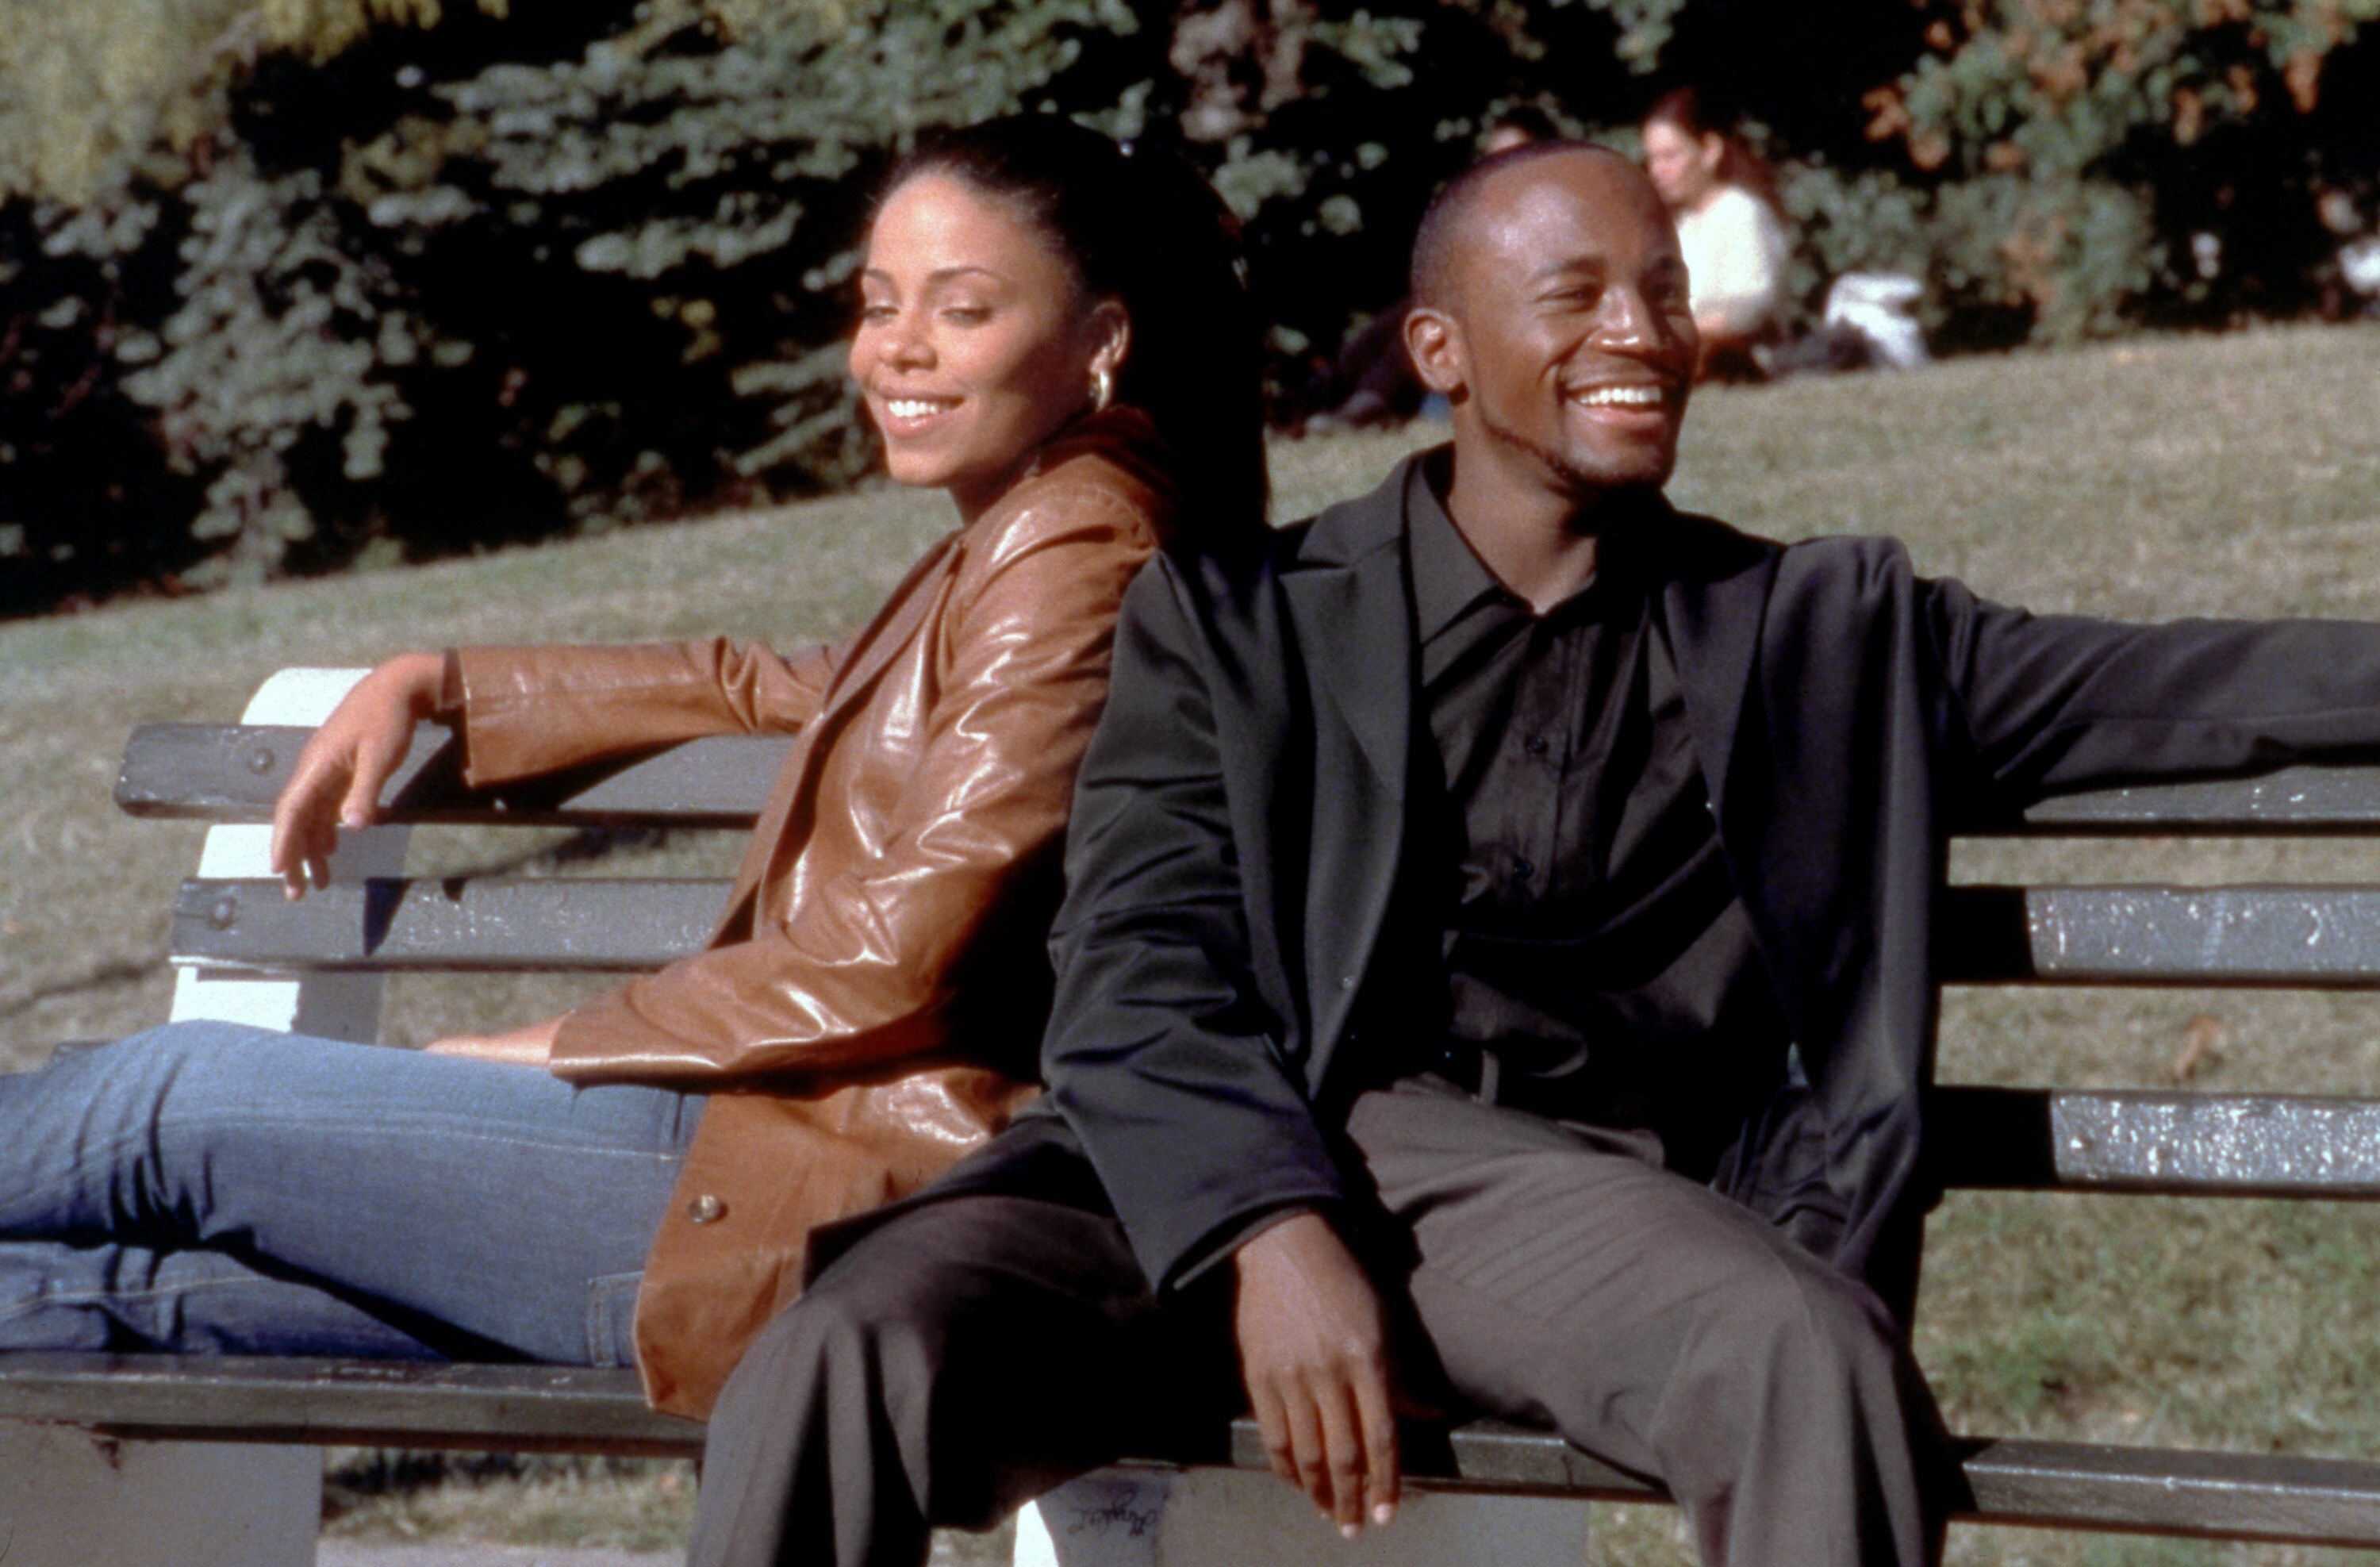 Black man and Black woman sit on a park bench smiling